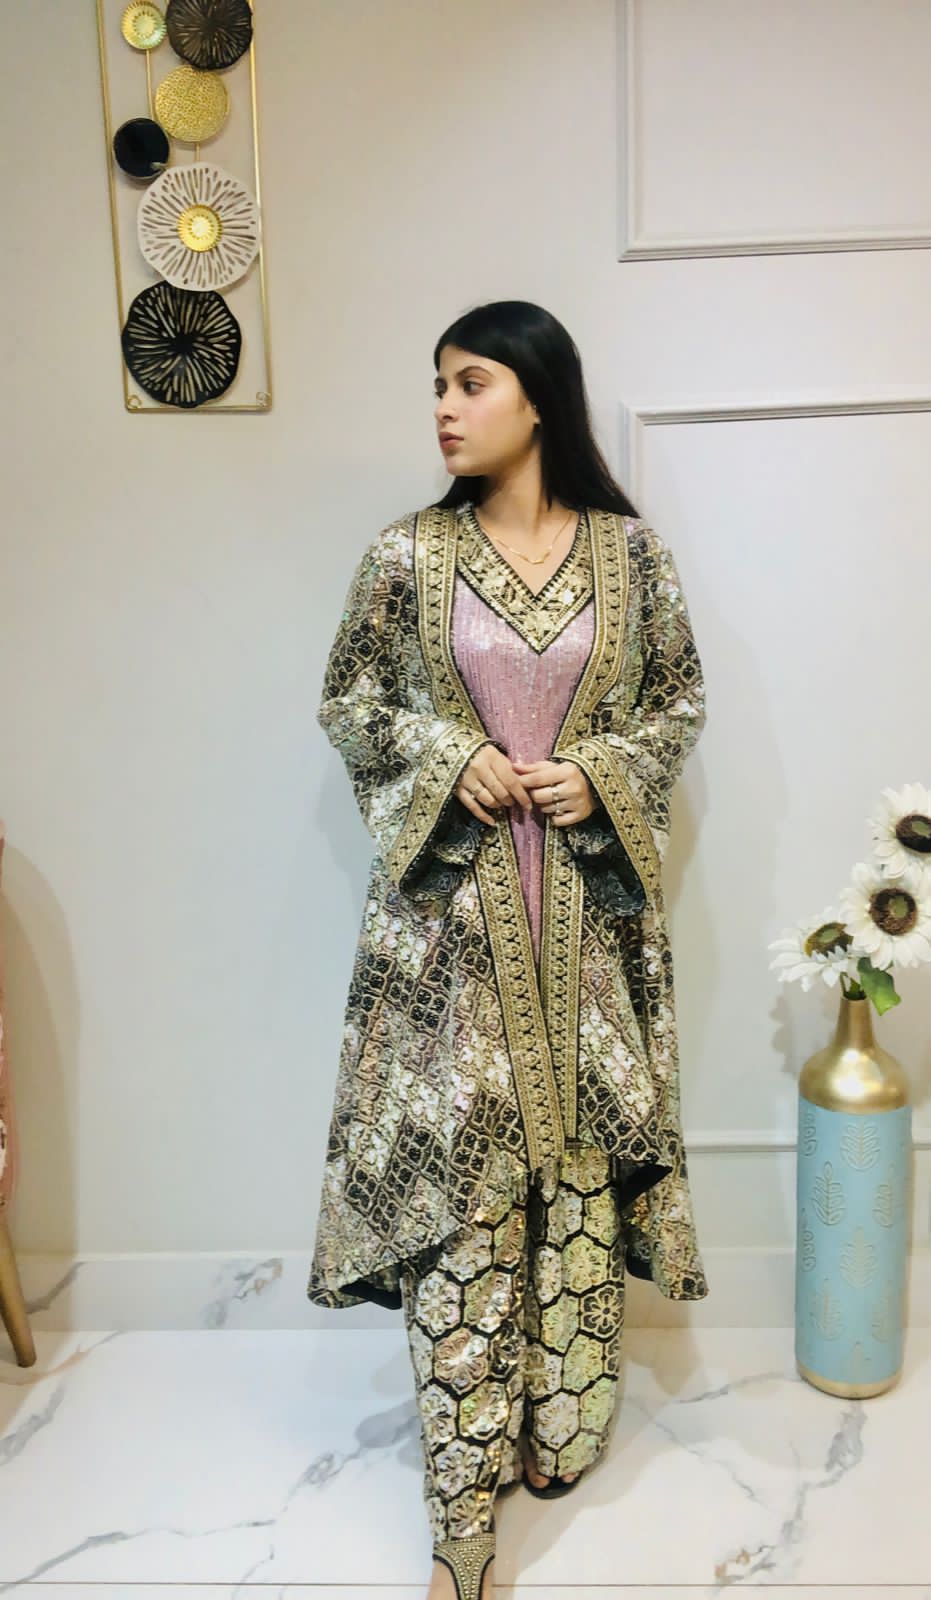 Royal Sequin Splendor: 3-Piece Silk Ensemble with Heavy Sequence Work-Stitched